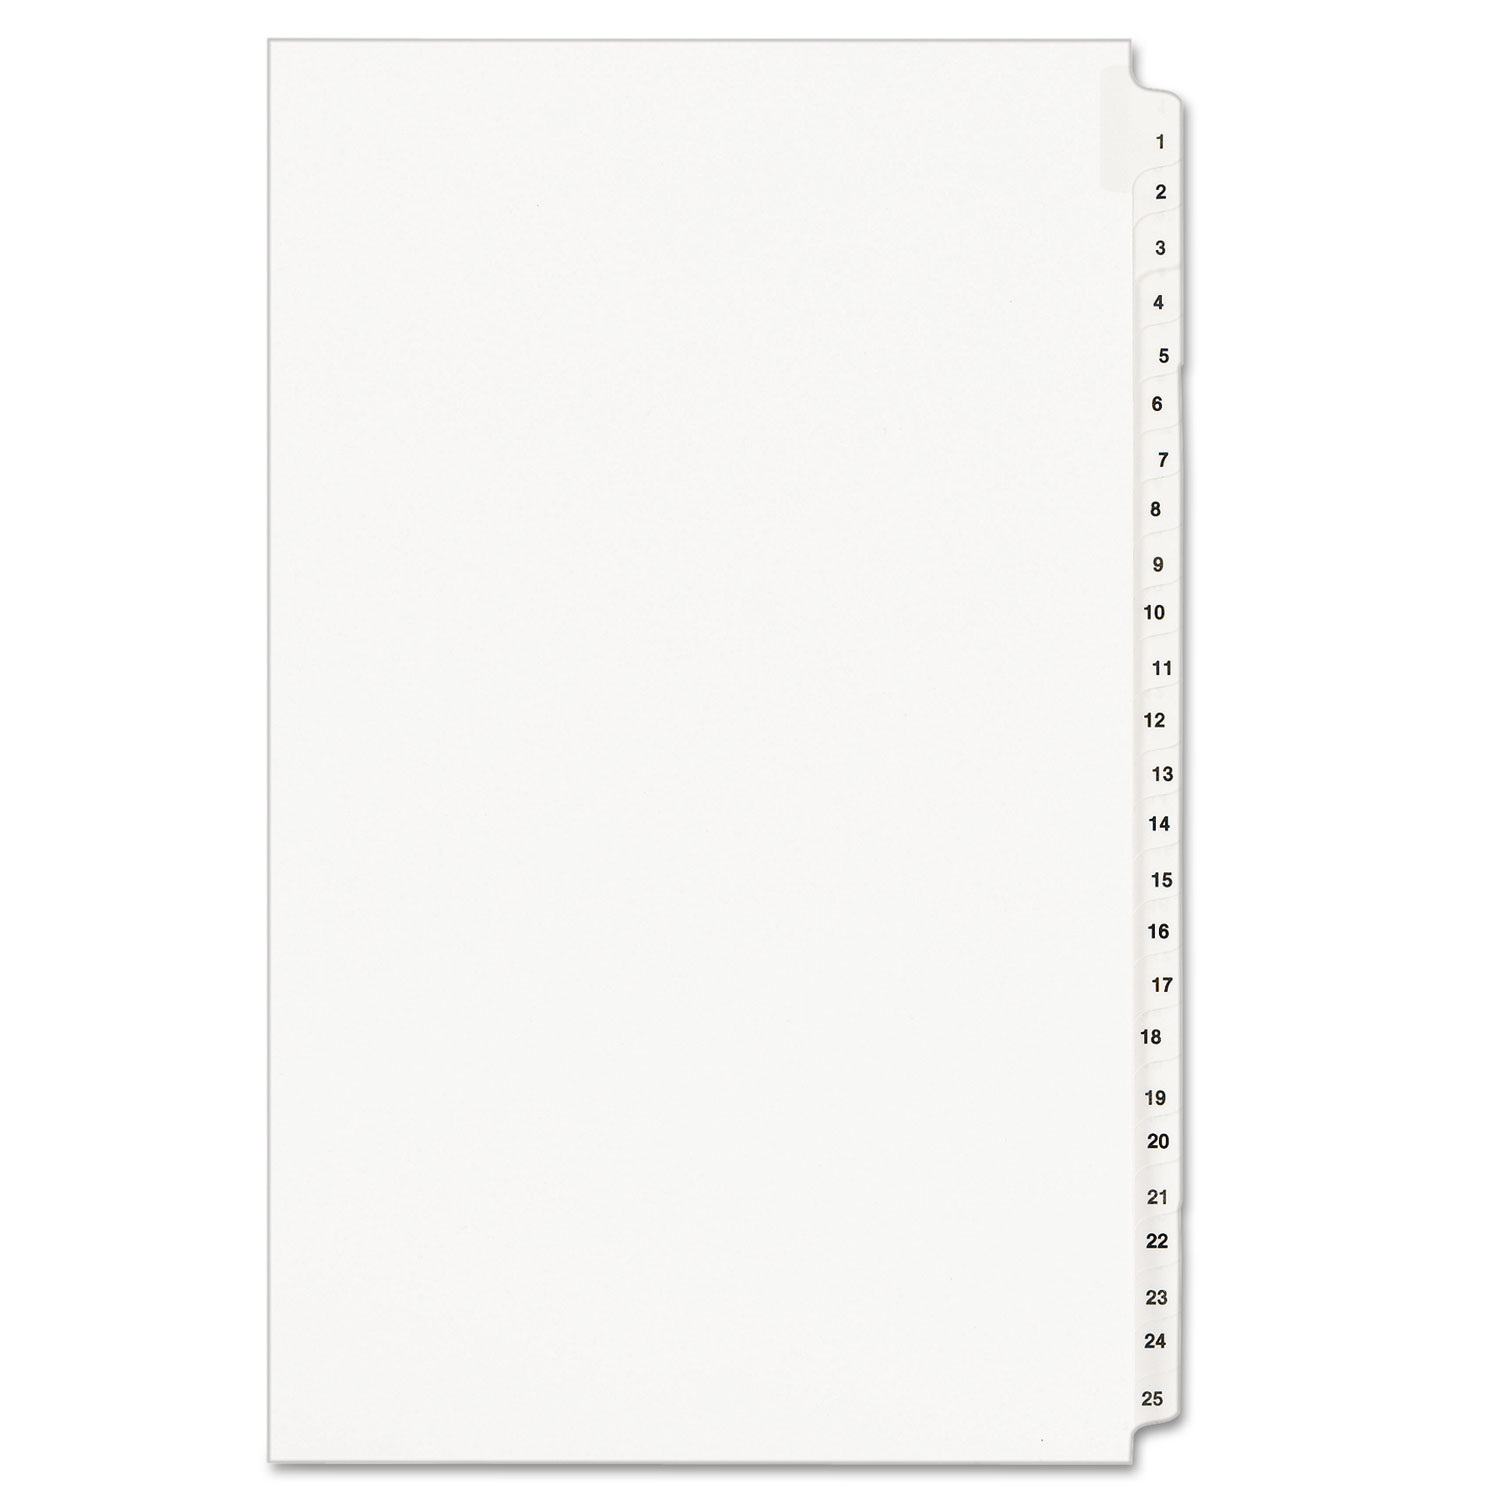  Avery 01430 Preprinted Legal Exhibit Side Tab Index Dividers, Avery Style, 25-Tab, 1 to 25, 14 x 8.5, White, 1 Set (AVE01430) 